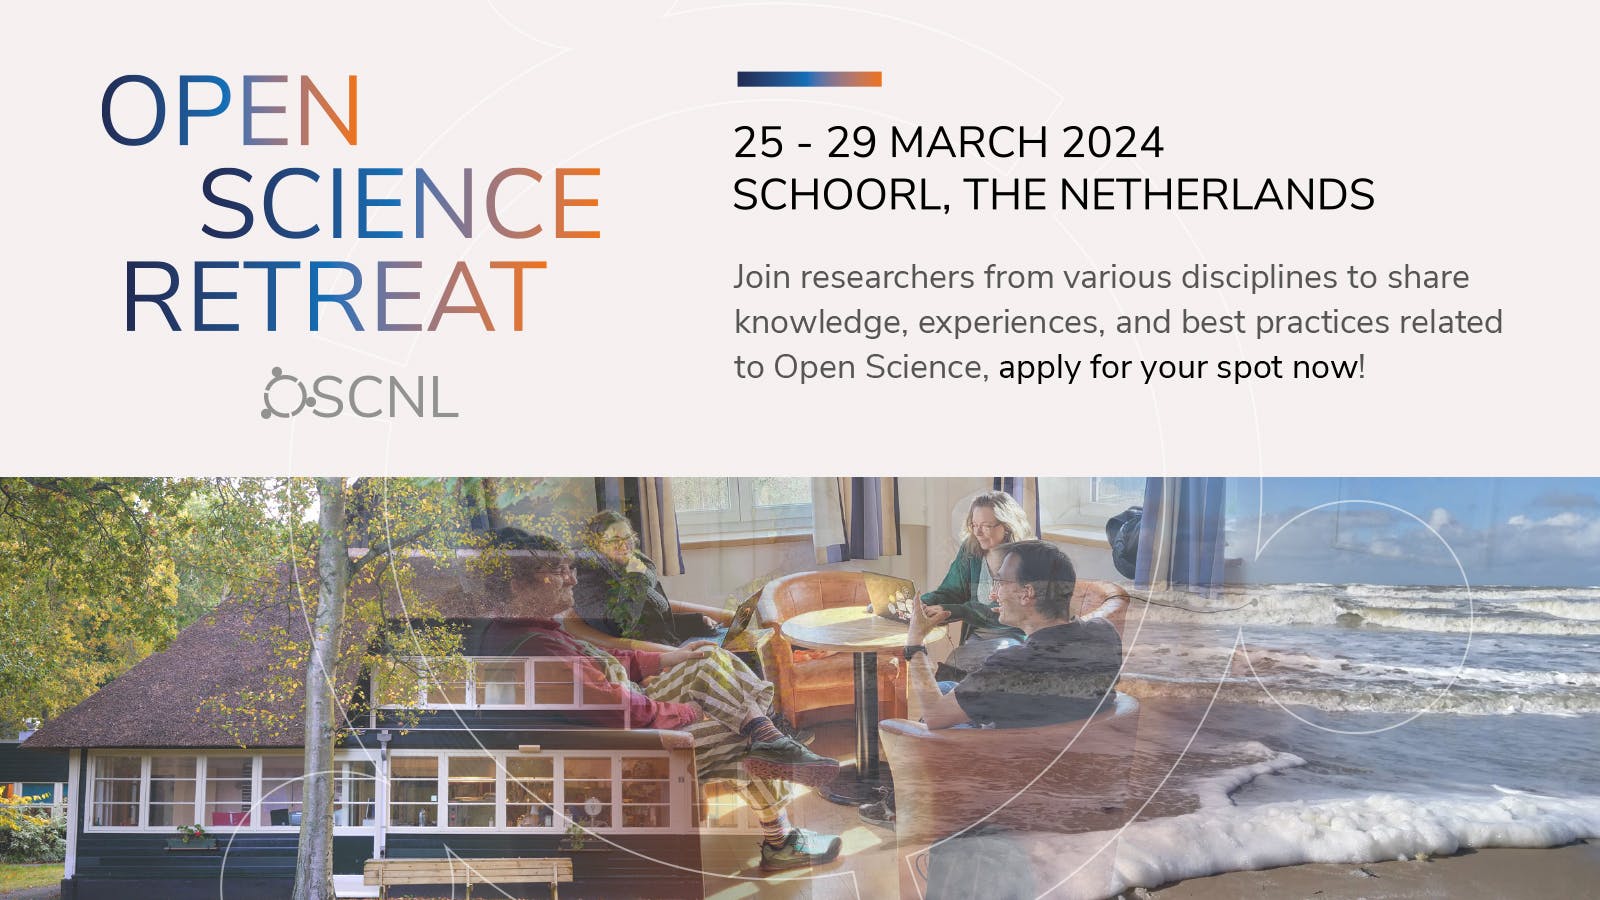 25 - 29 March 2024, Schoorl, the netherlands. Apply for your spot now!